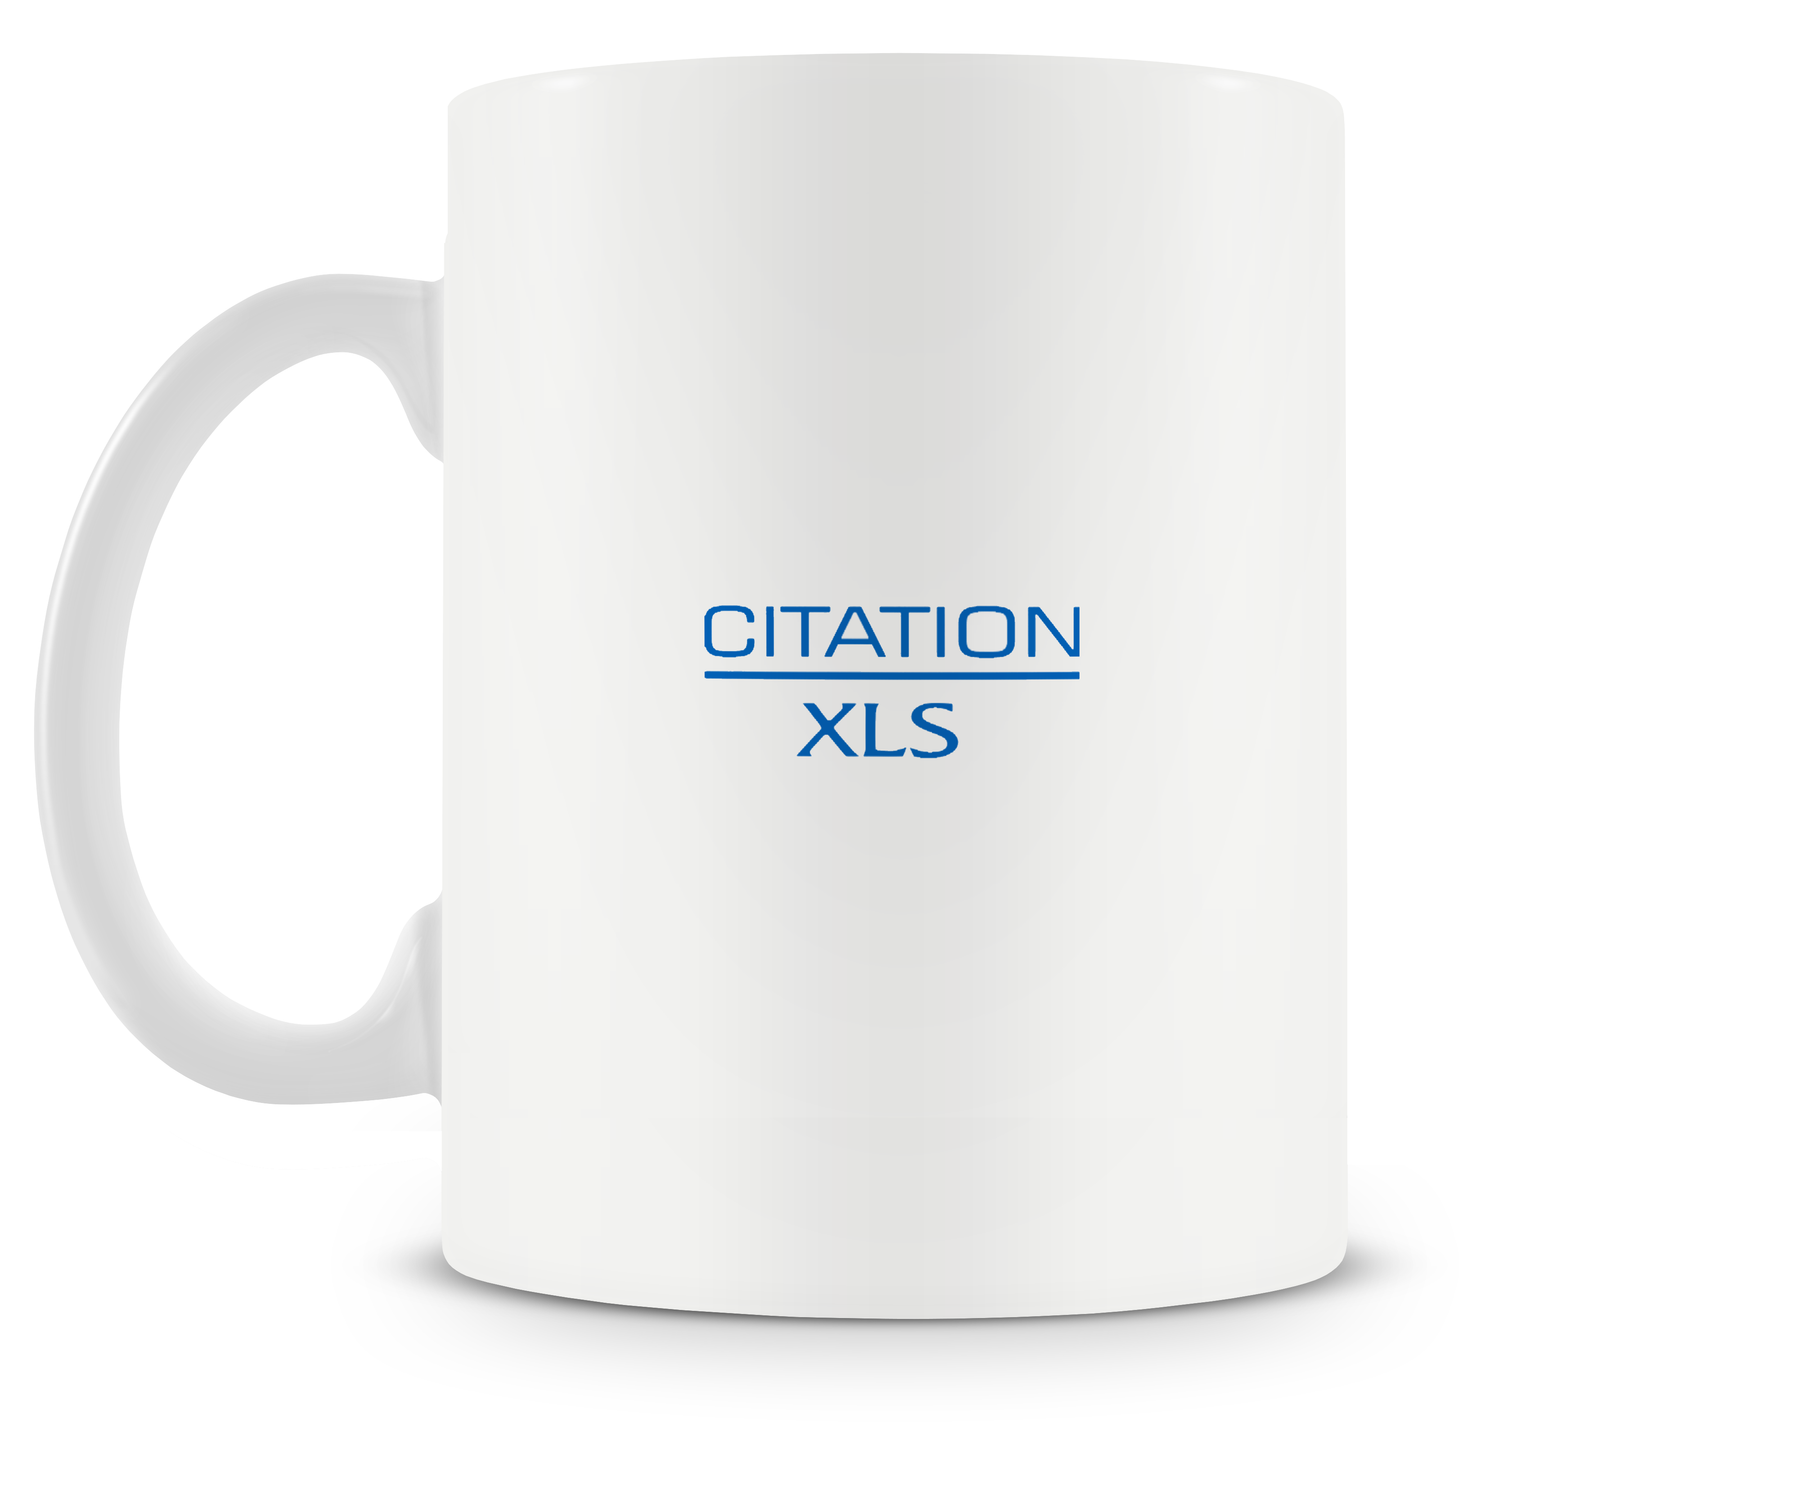 Cessna Citation XLS Mug - the XLS is the updated version of the Excel